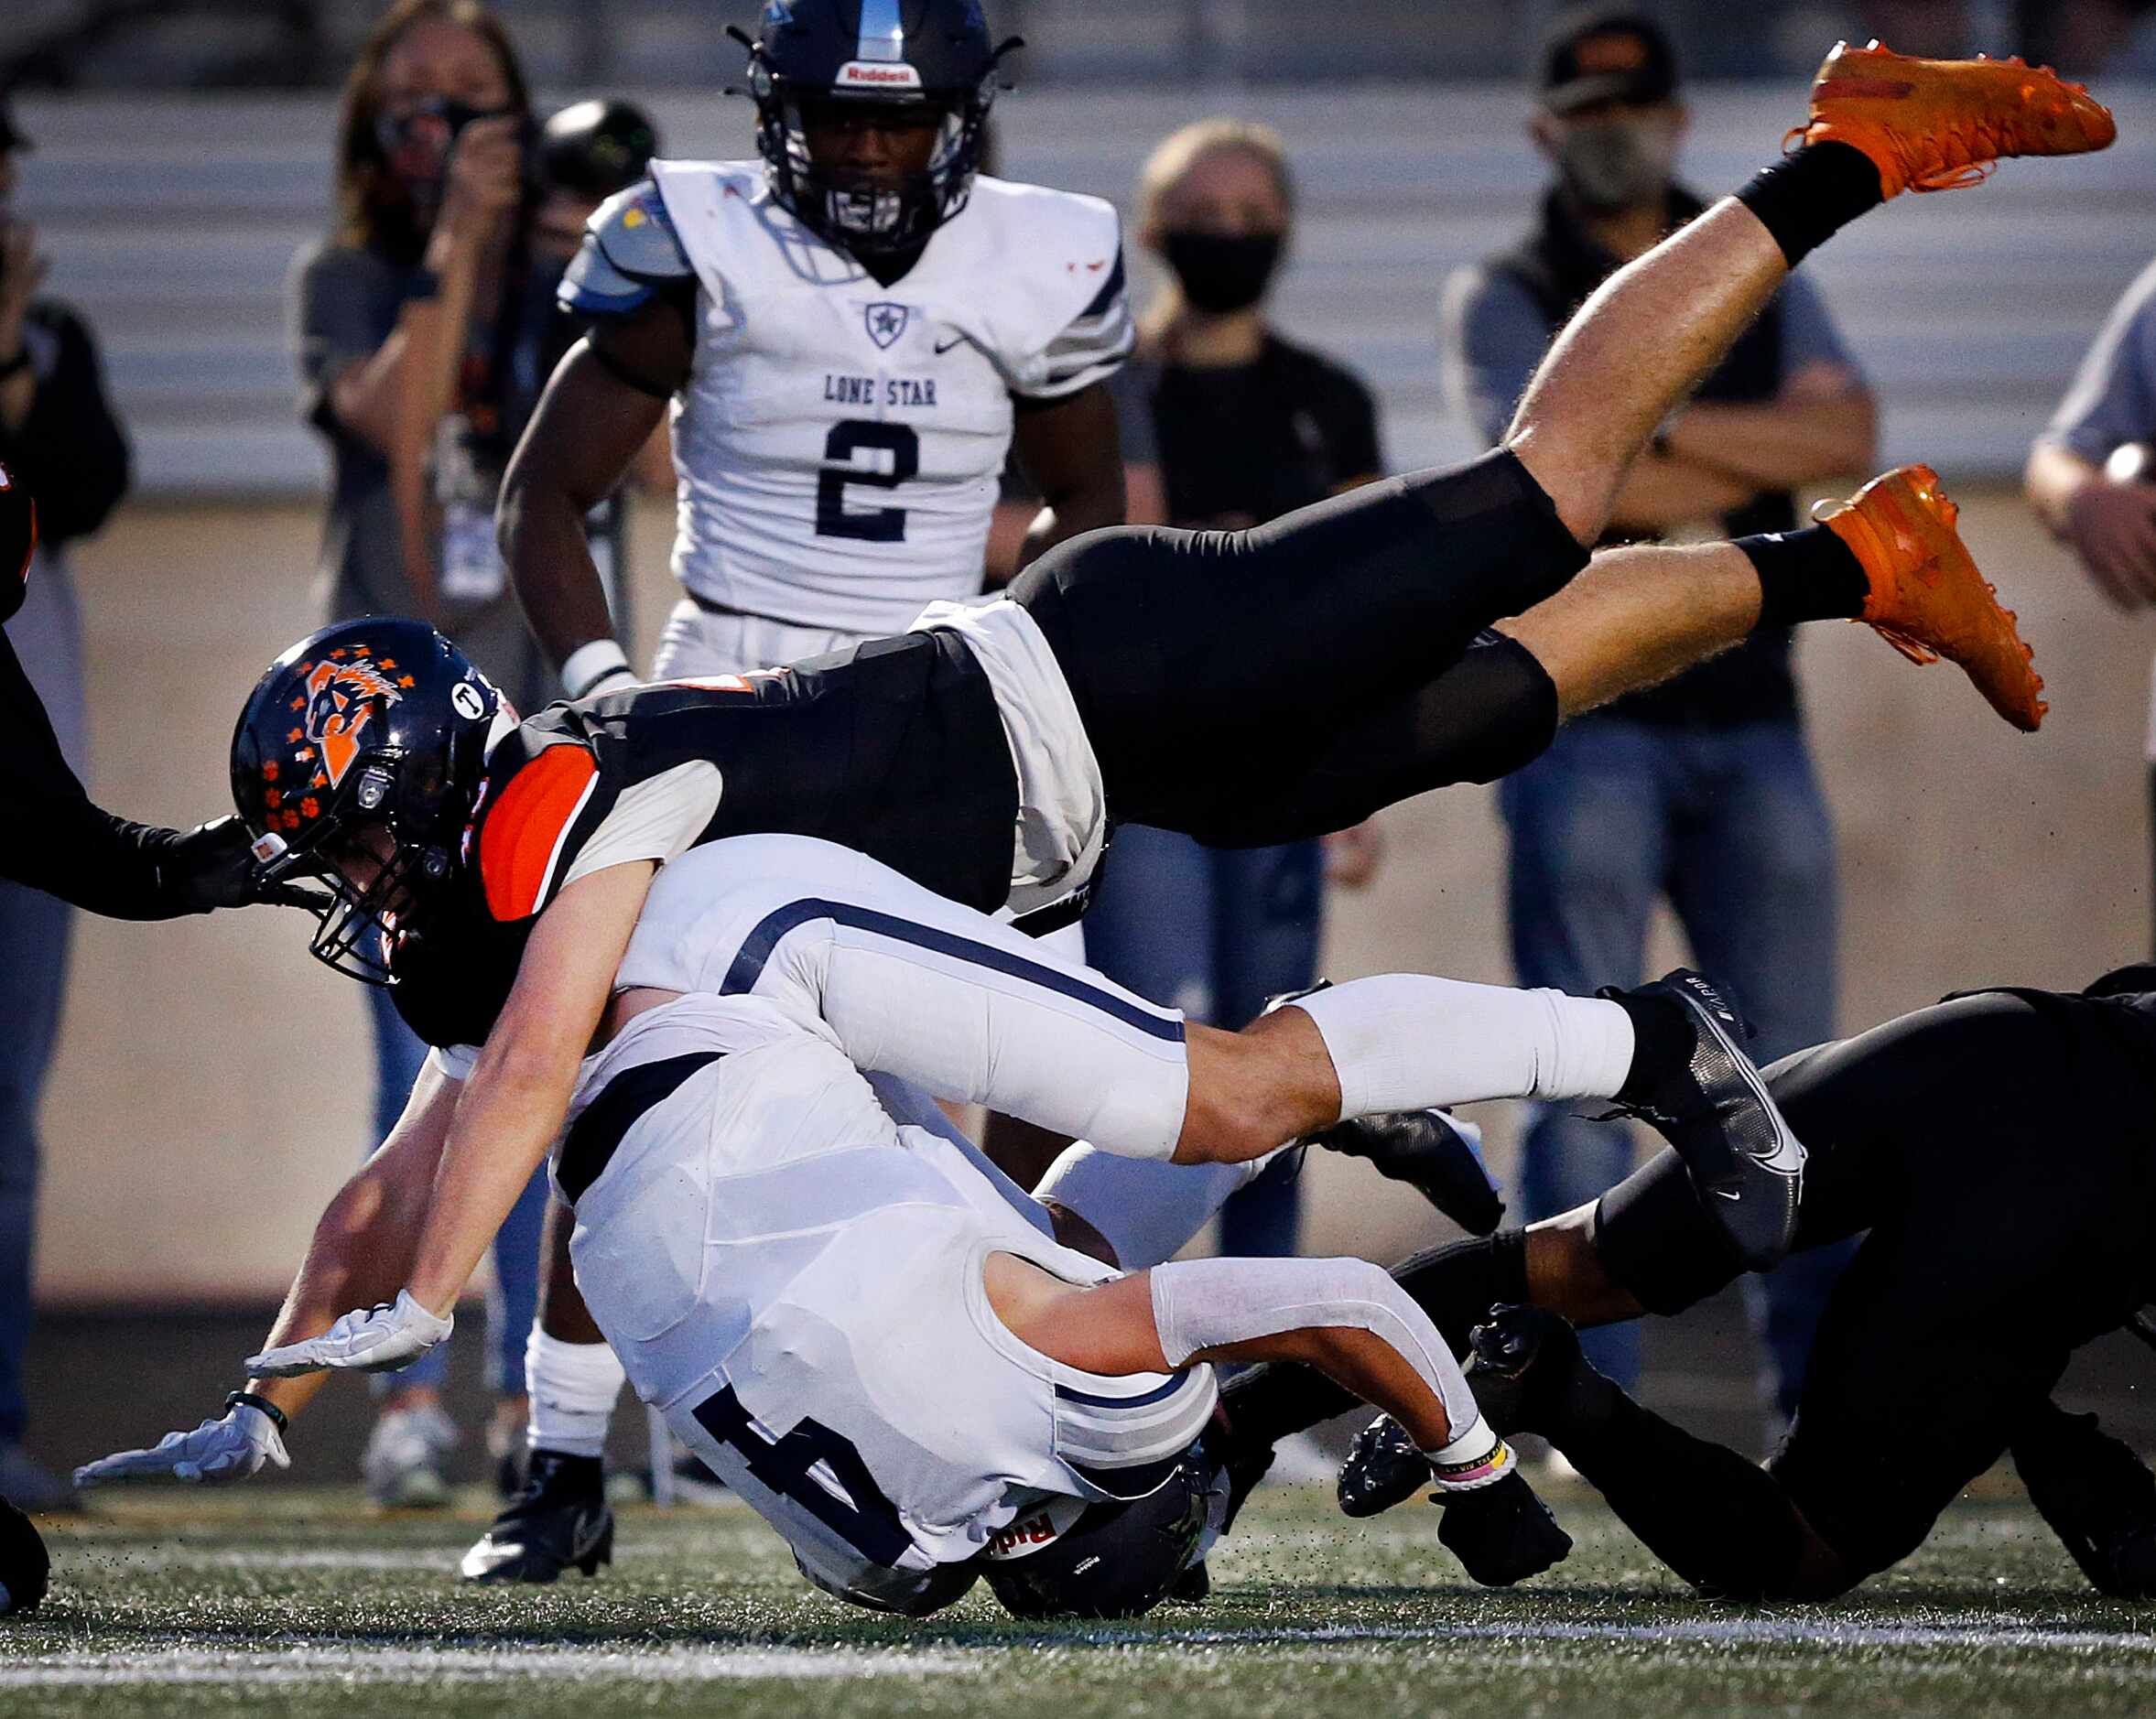 Frisco Lone Star receiver Trace Bruckler (4) is rolled up by Aledo linebacker Keenan Hess...